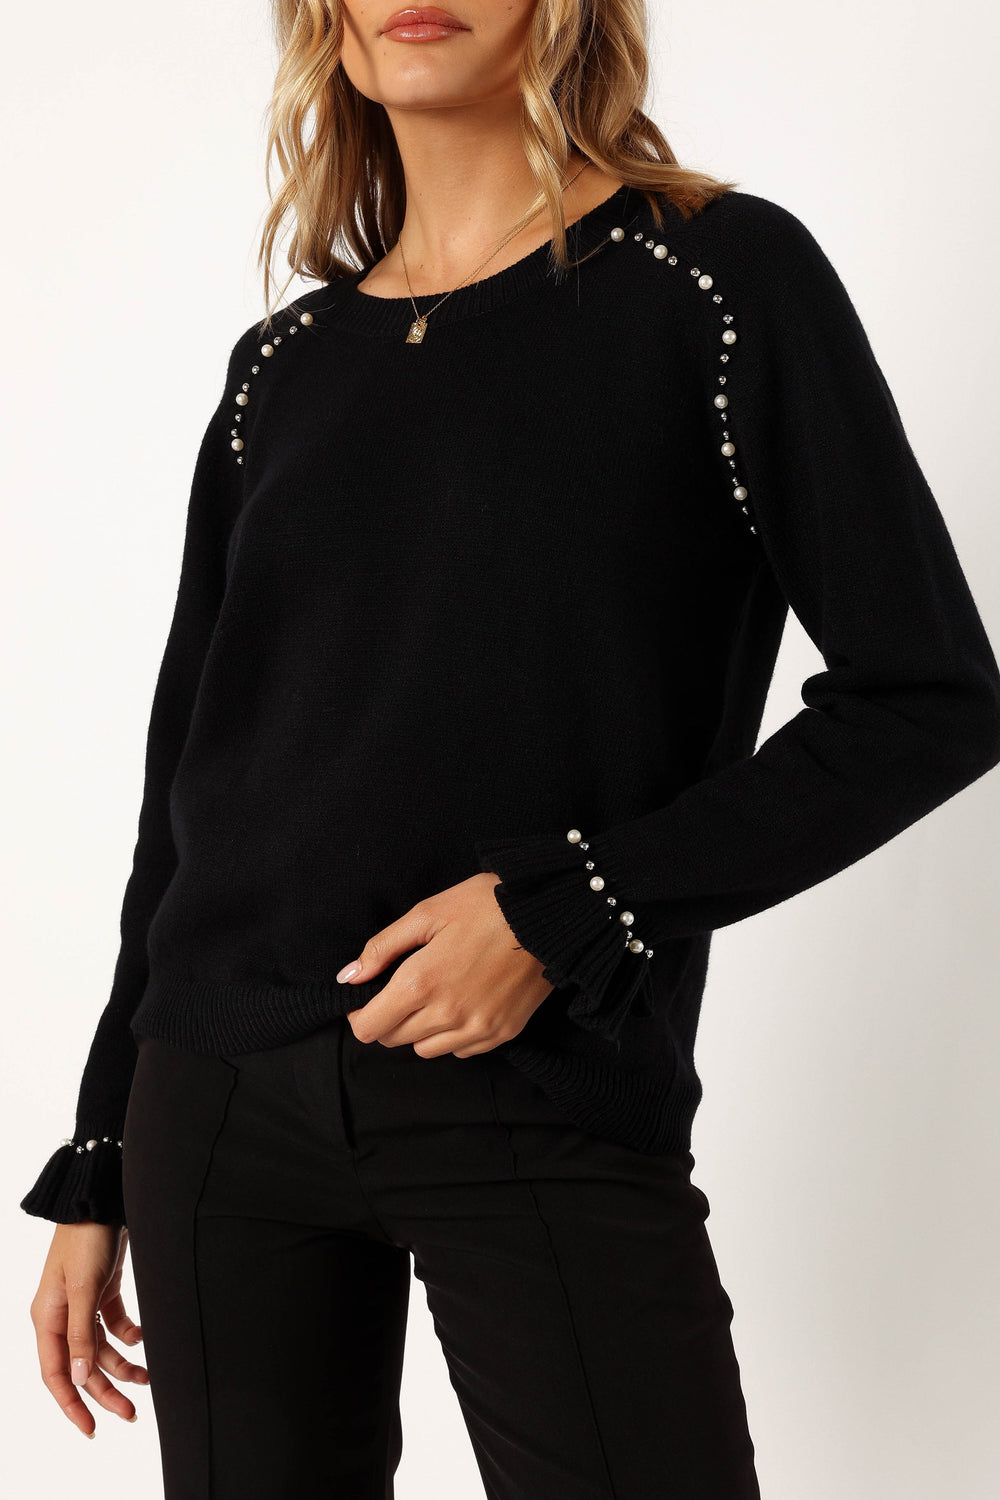 Petal and Pup USA KNITWEAR Blakely Pearl Detail Knit Sweater - Black